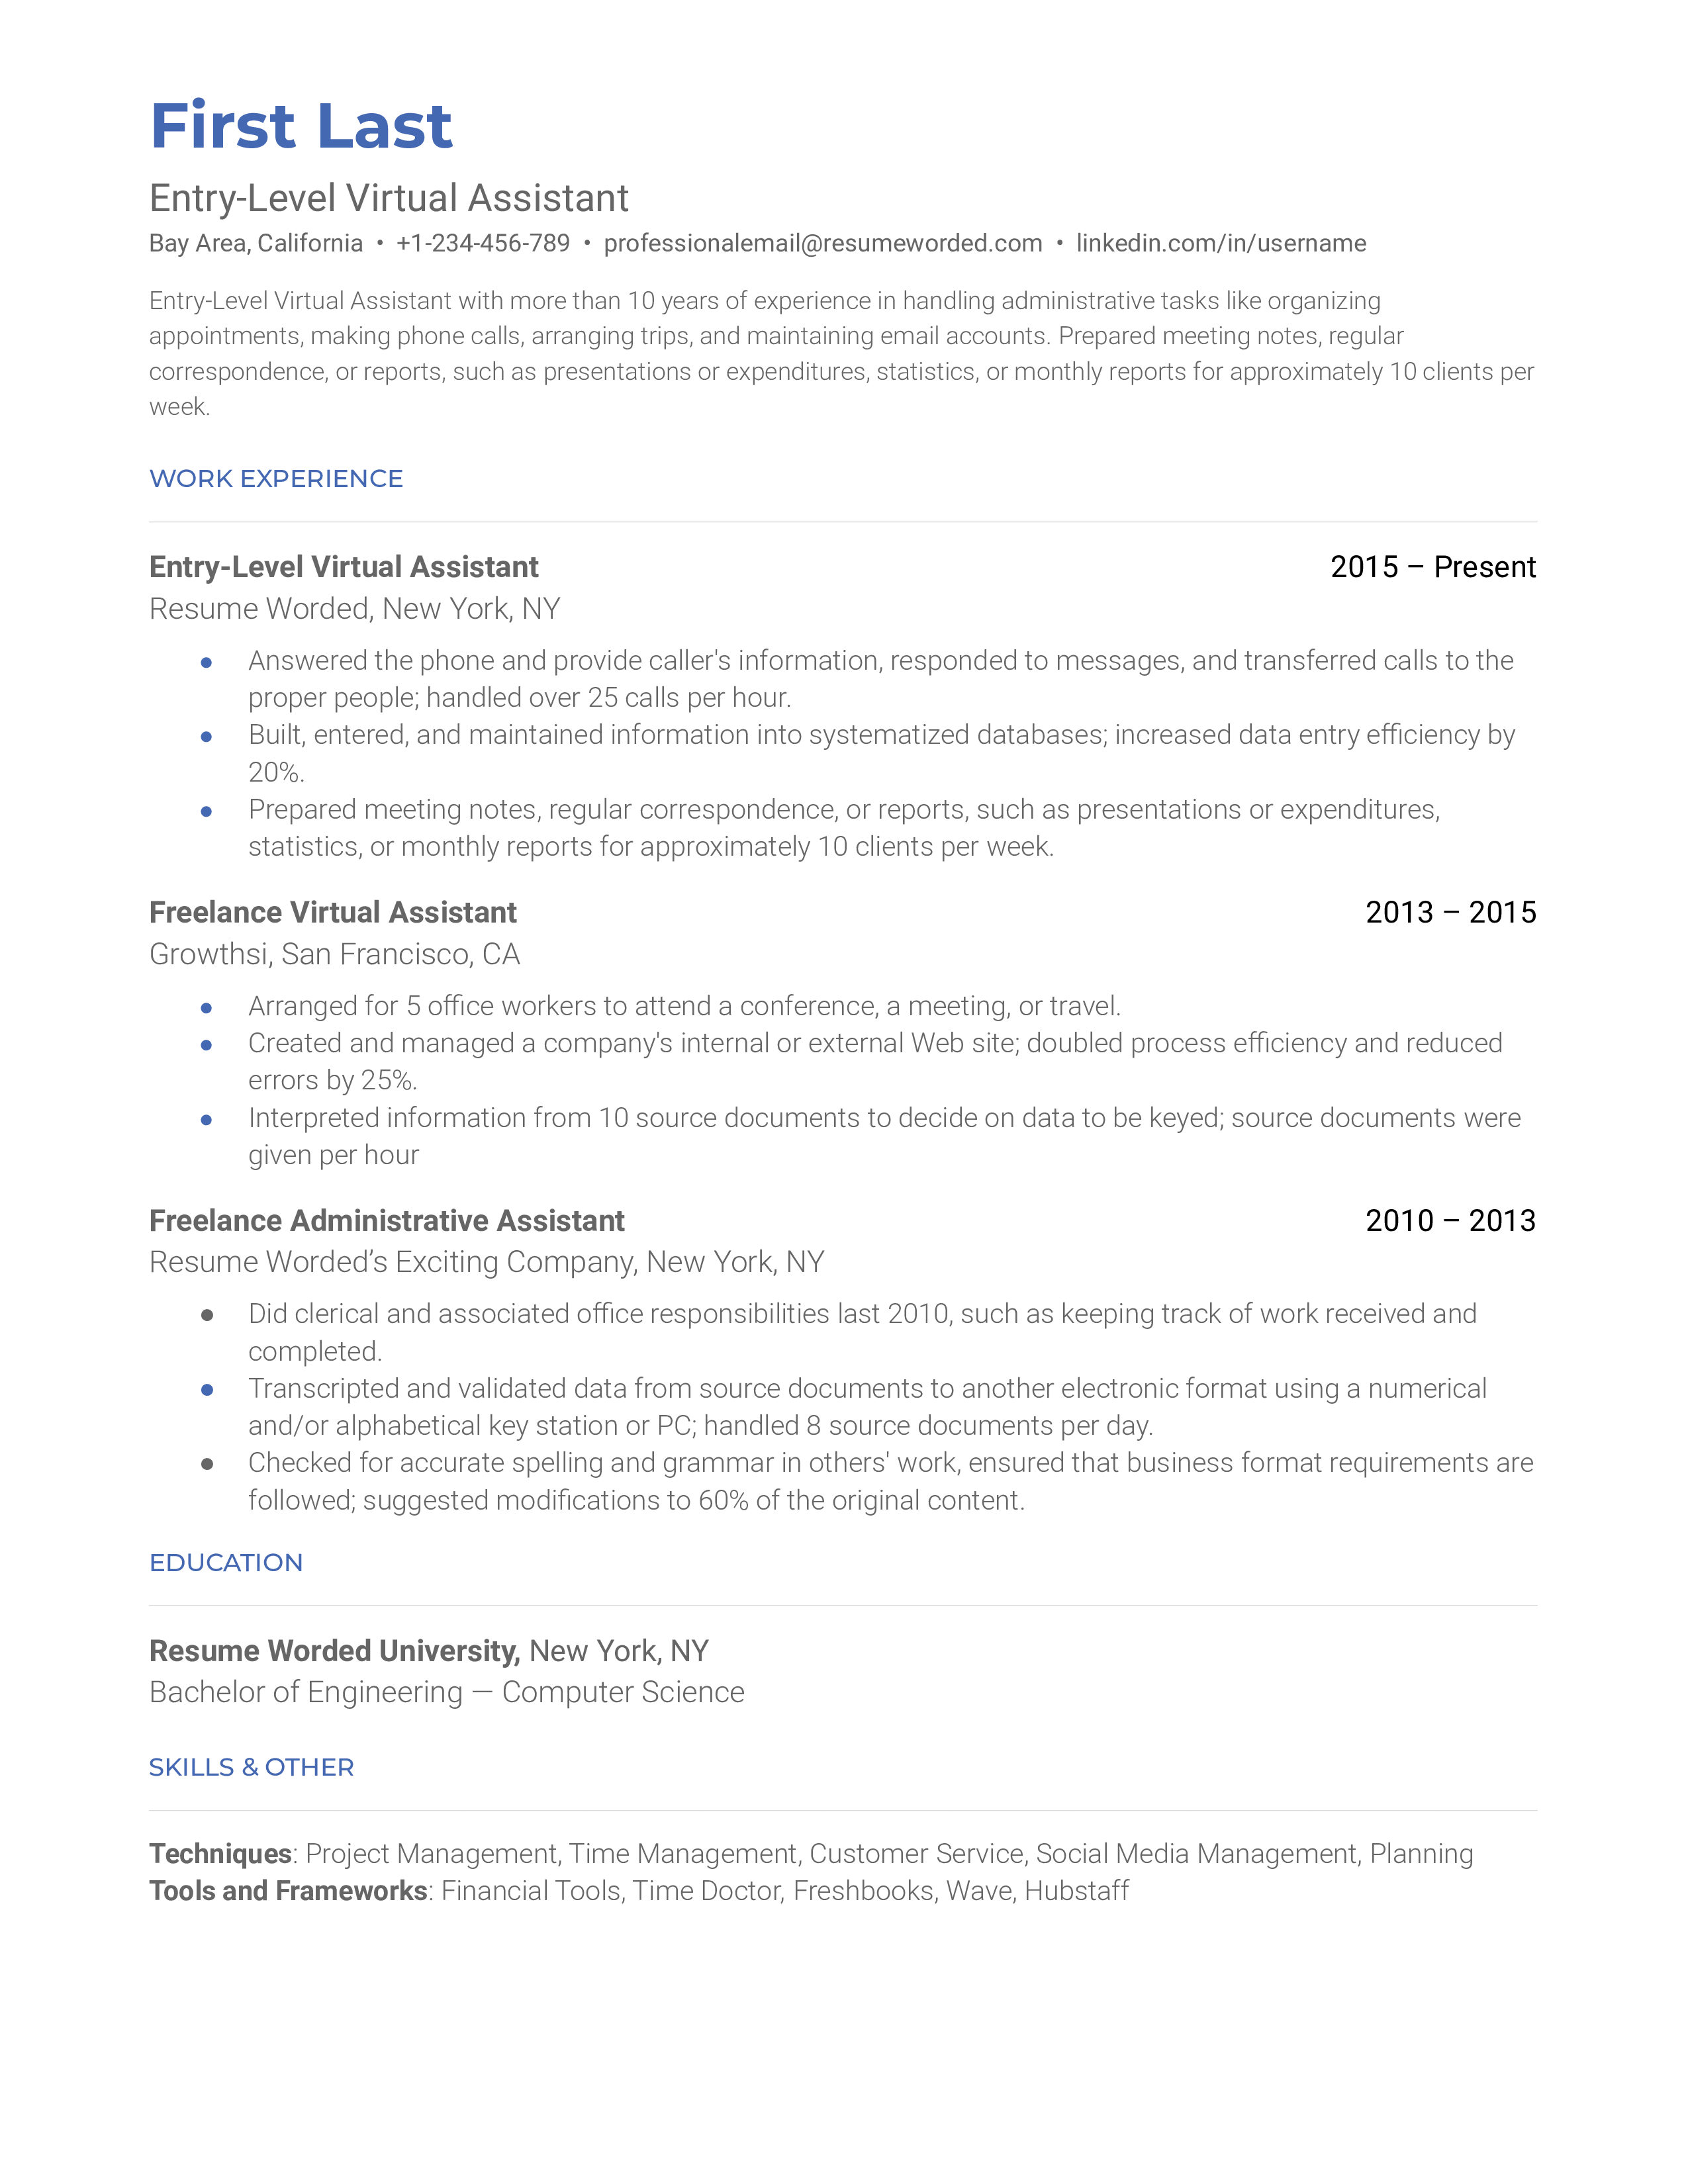 An Entry-Level Virtual Assistant CV showcasing digital competency and problem-solving skills.